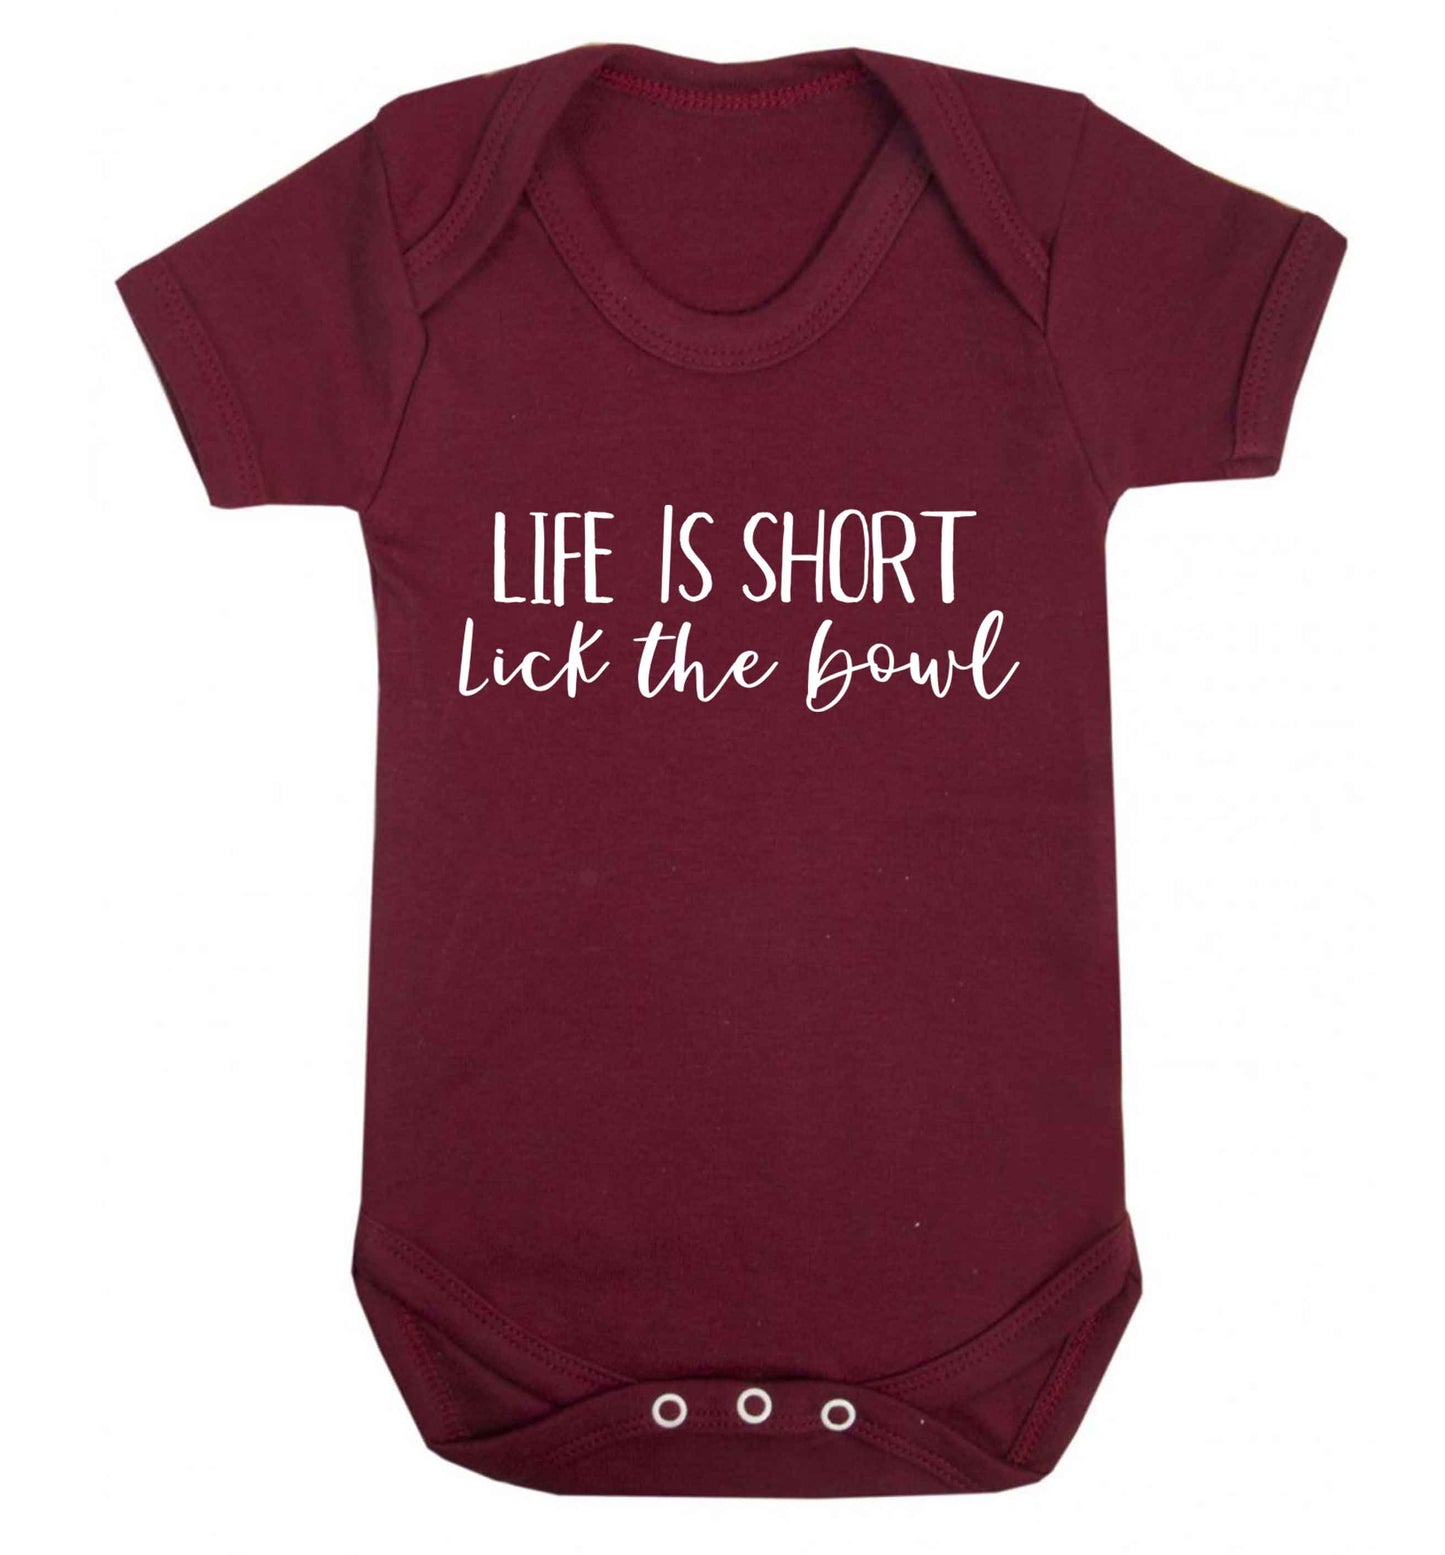 Life is short lick the bowl Baby Vest maroon 18-24 months